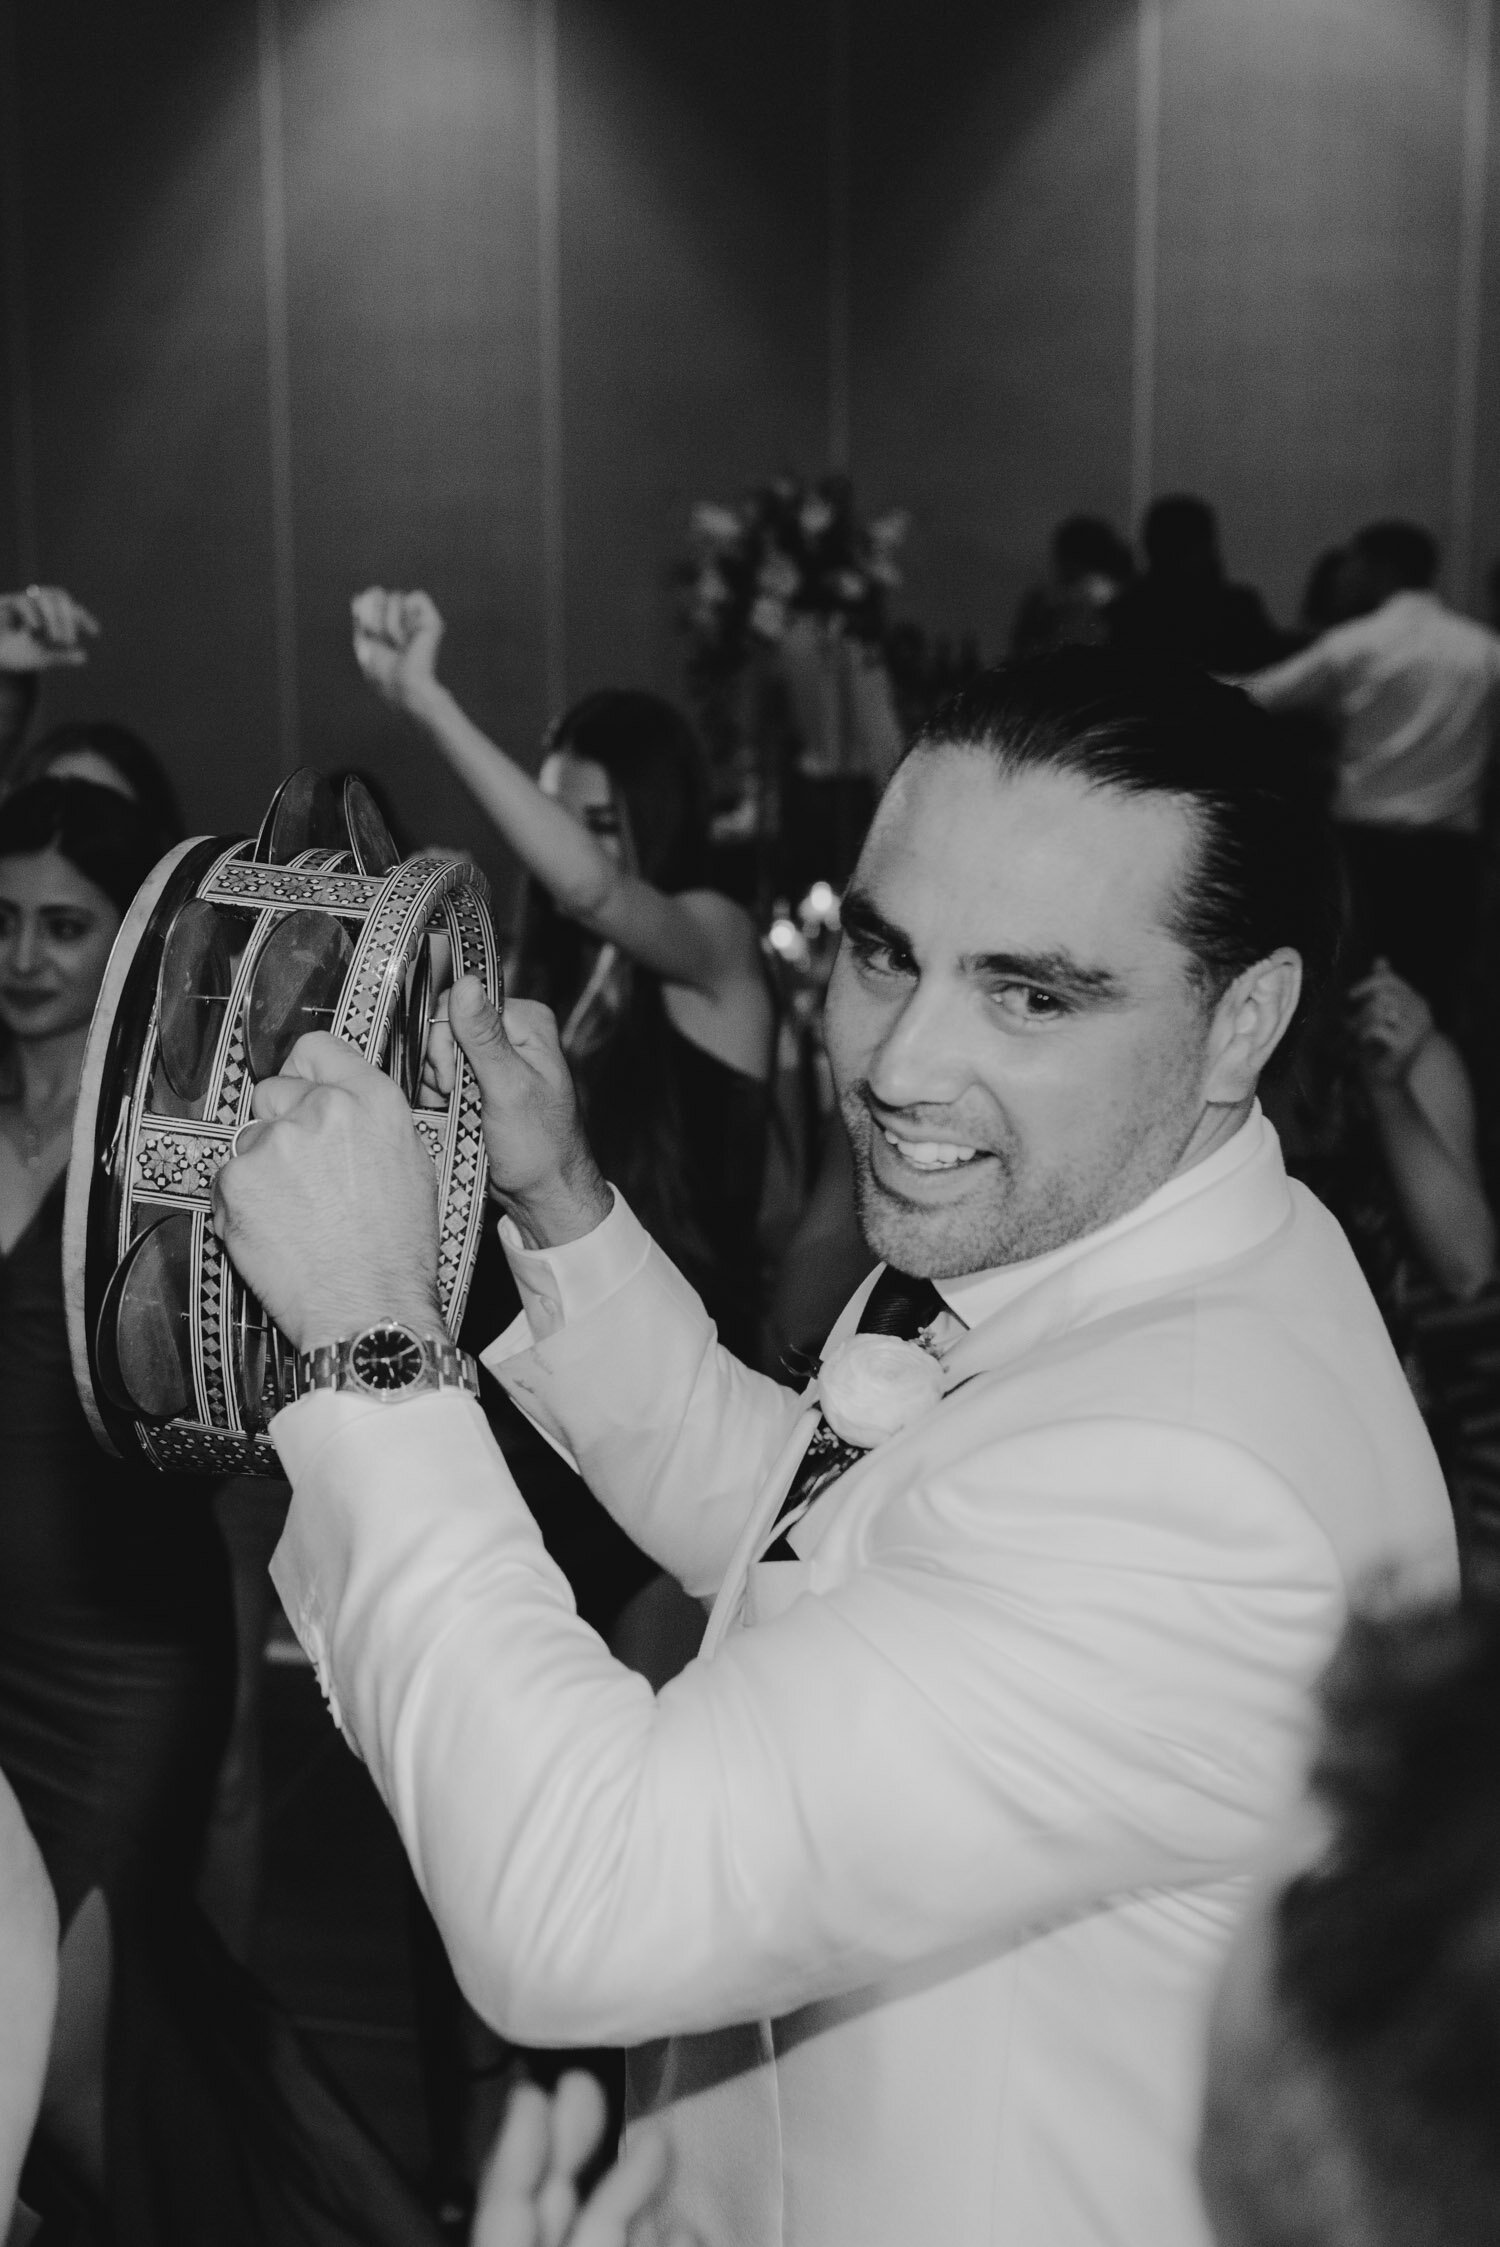 Palisades wedding, photo of groom playing the drums with the drummers